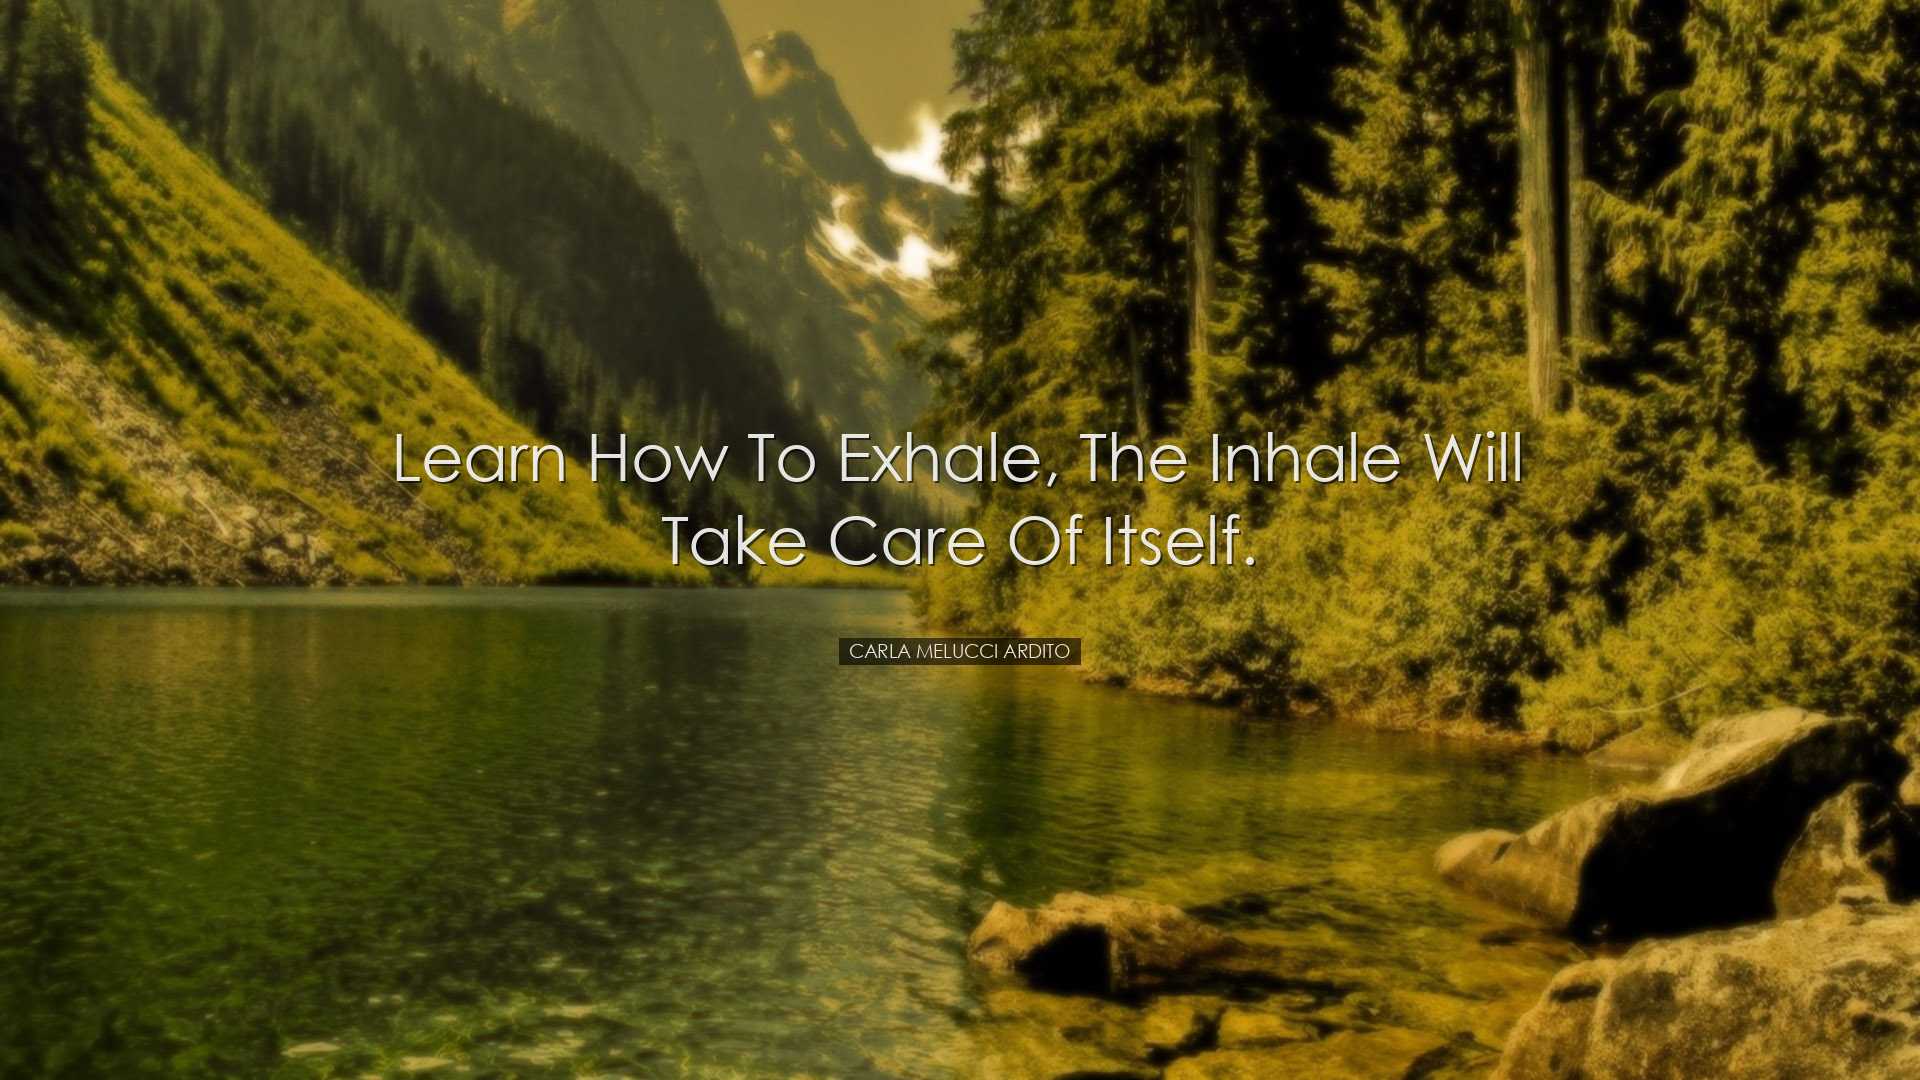 Learn how to exhale, the inhale will take care of itself. - Carla